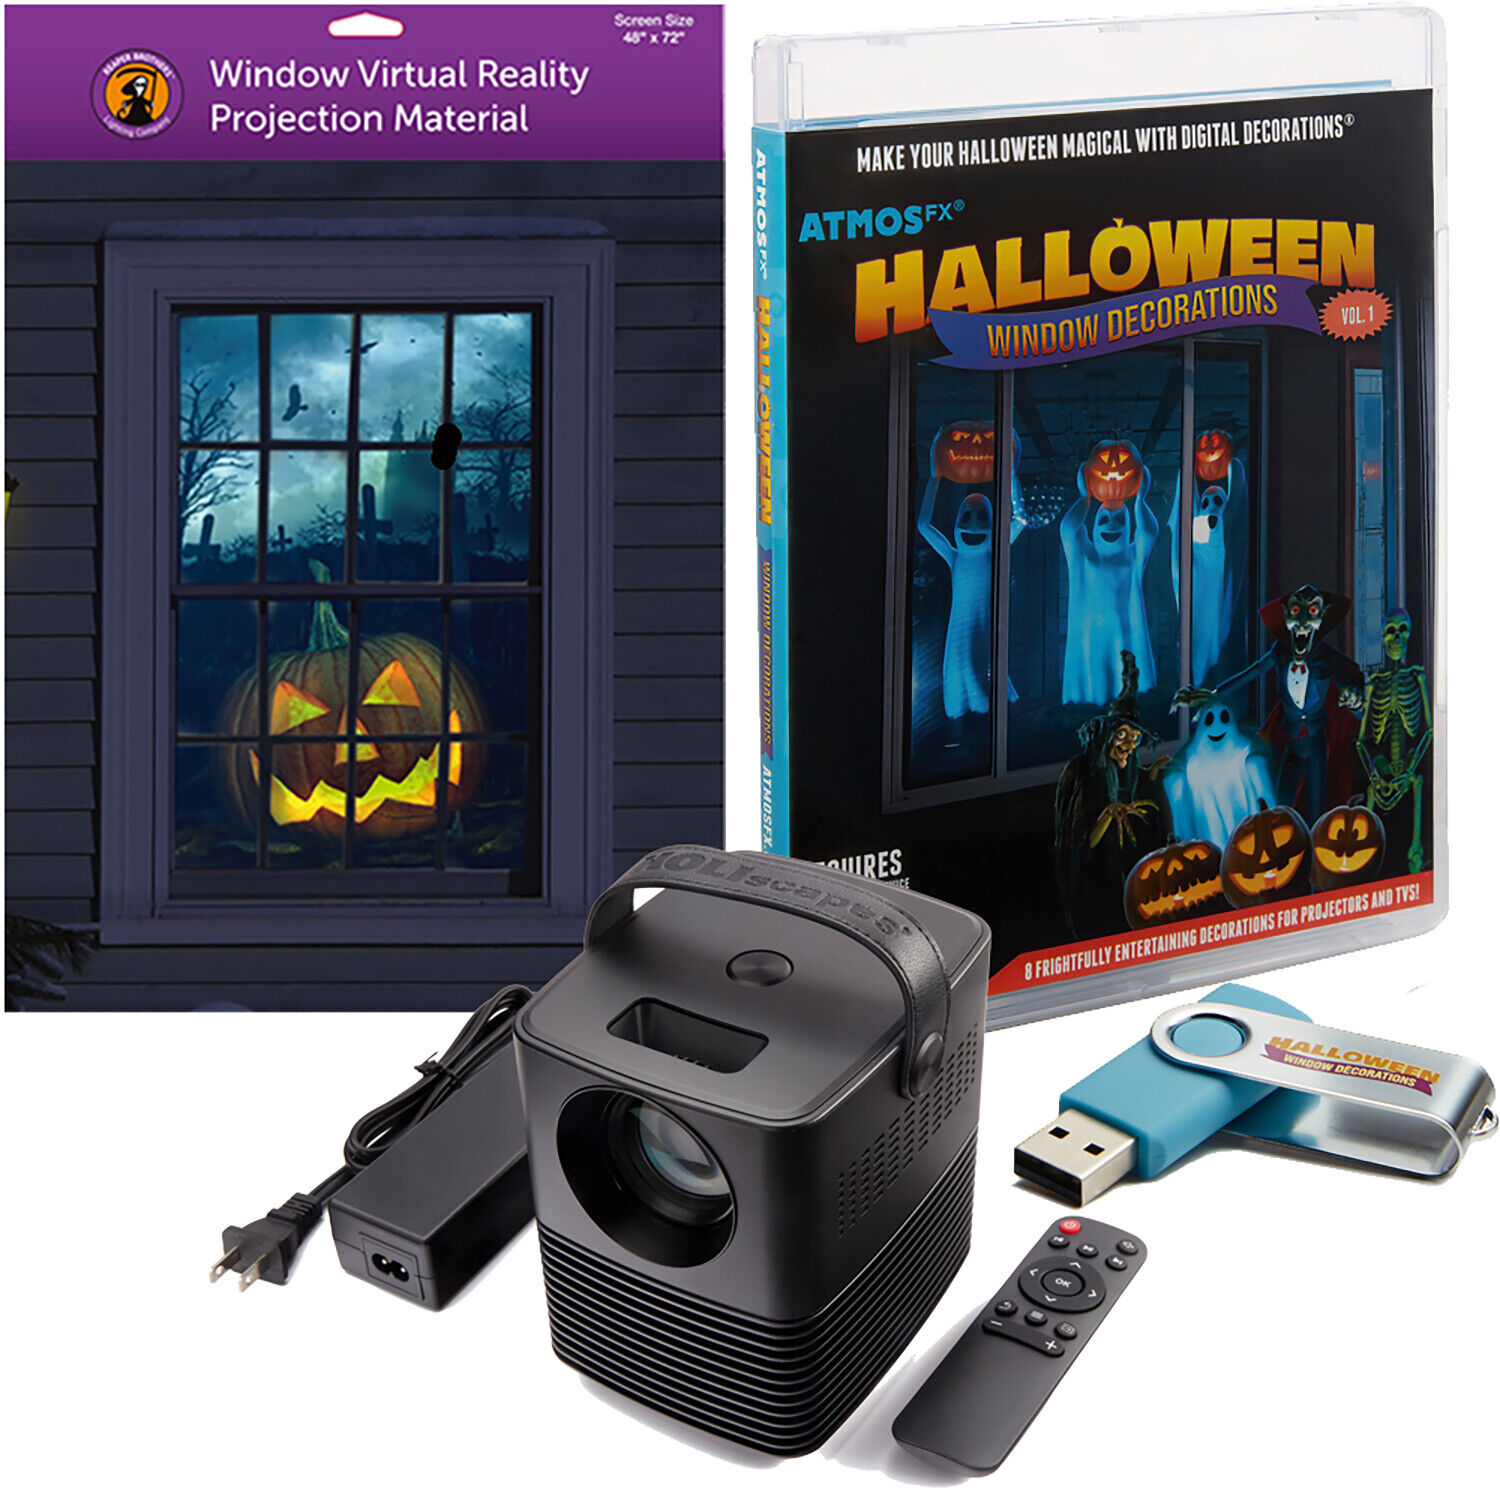 AtmosFX Digital Decoration Kits - Videos, Screen & Projector included